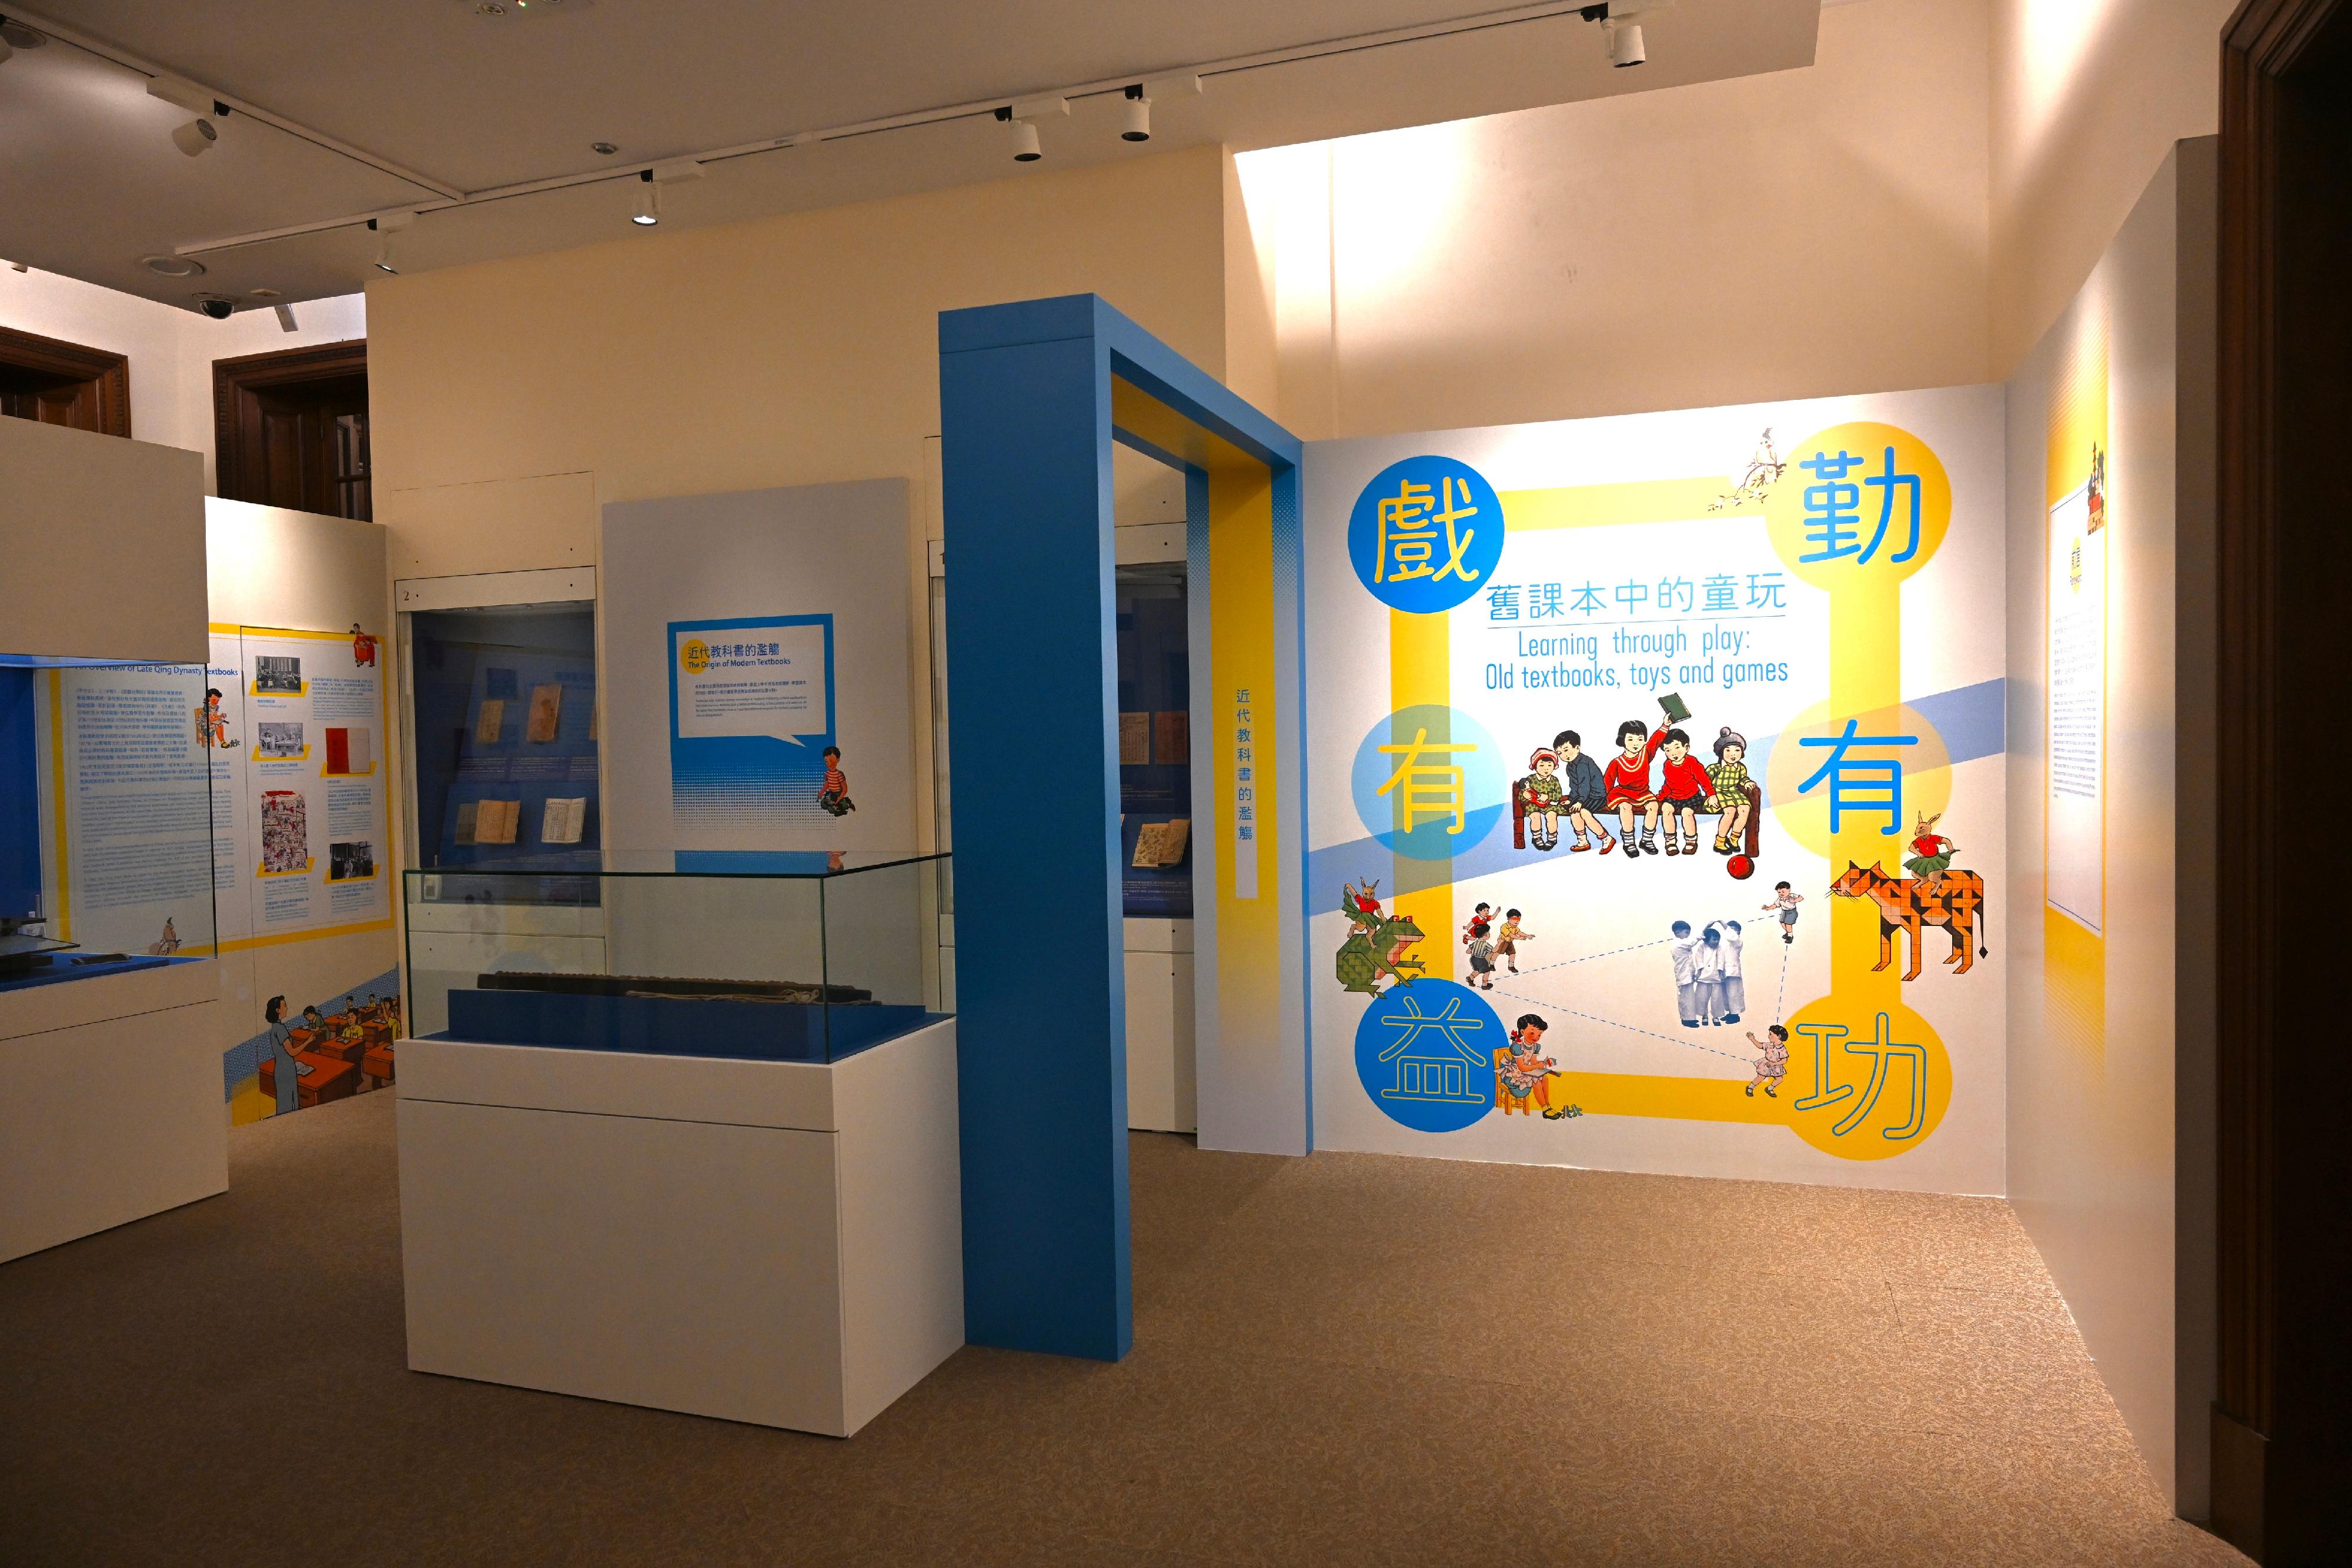 The Dr Sun Yat-sen Museum will launch a new special exhibition, "Learning through play: Old textbooks, toys and games", tomorrow (December 22). The exhibition showcases more than 60 sets of exhibits, including Chinese textbooks, games and toys that were published and produced on the Mainland and in Hong Kong from the early to mid-20th century. It also introduces the development of textbooks and explores the importance of children's play in teaching.
